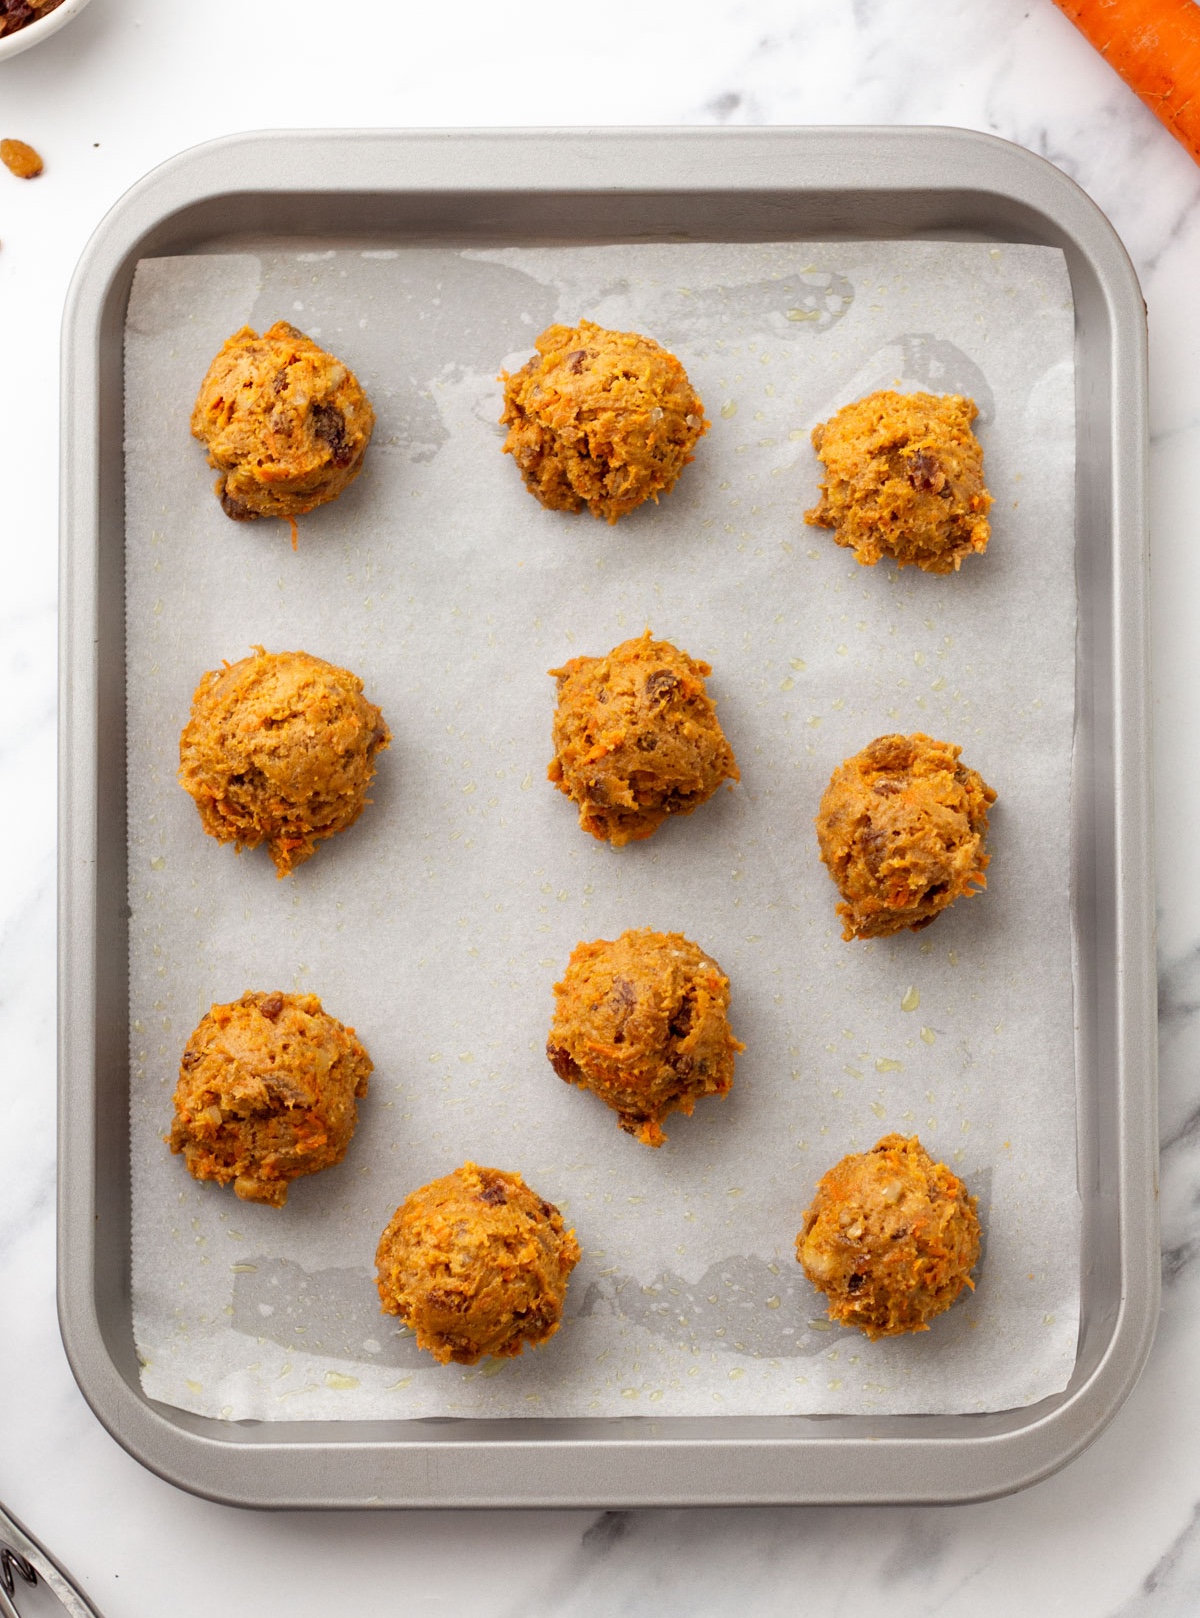 Carrot cookie dough added to the baking sheet